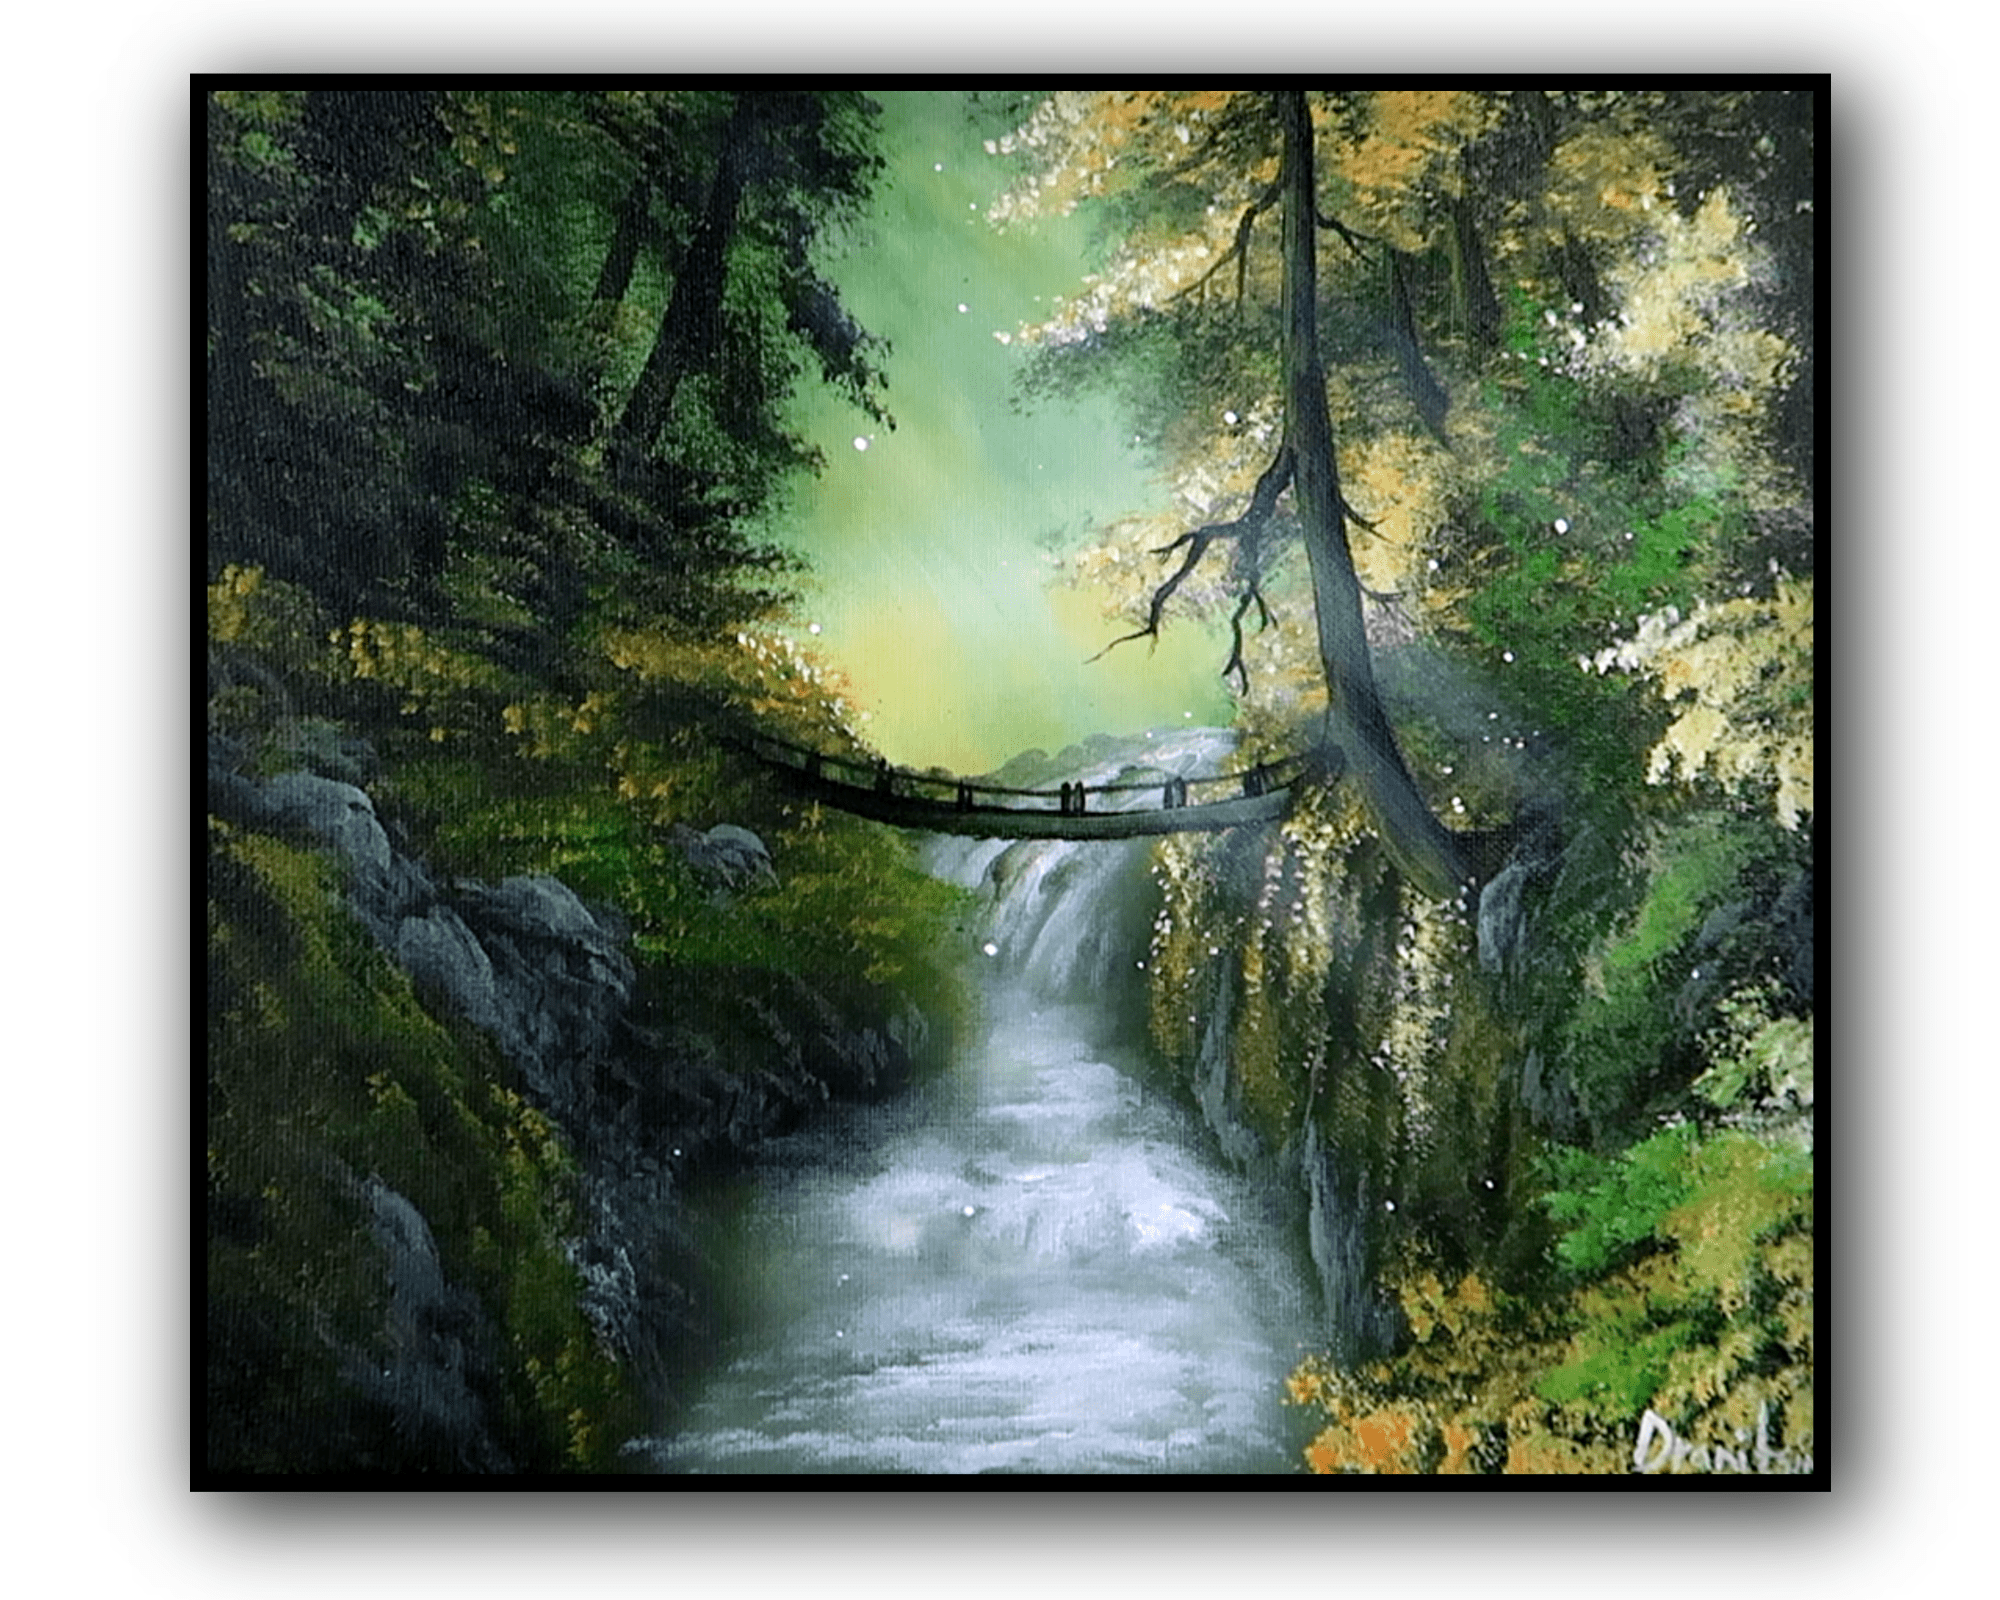 sunny side of the waterfall acrylic landscape painting by urartstudio.com 5